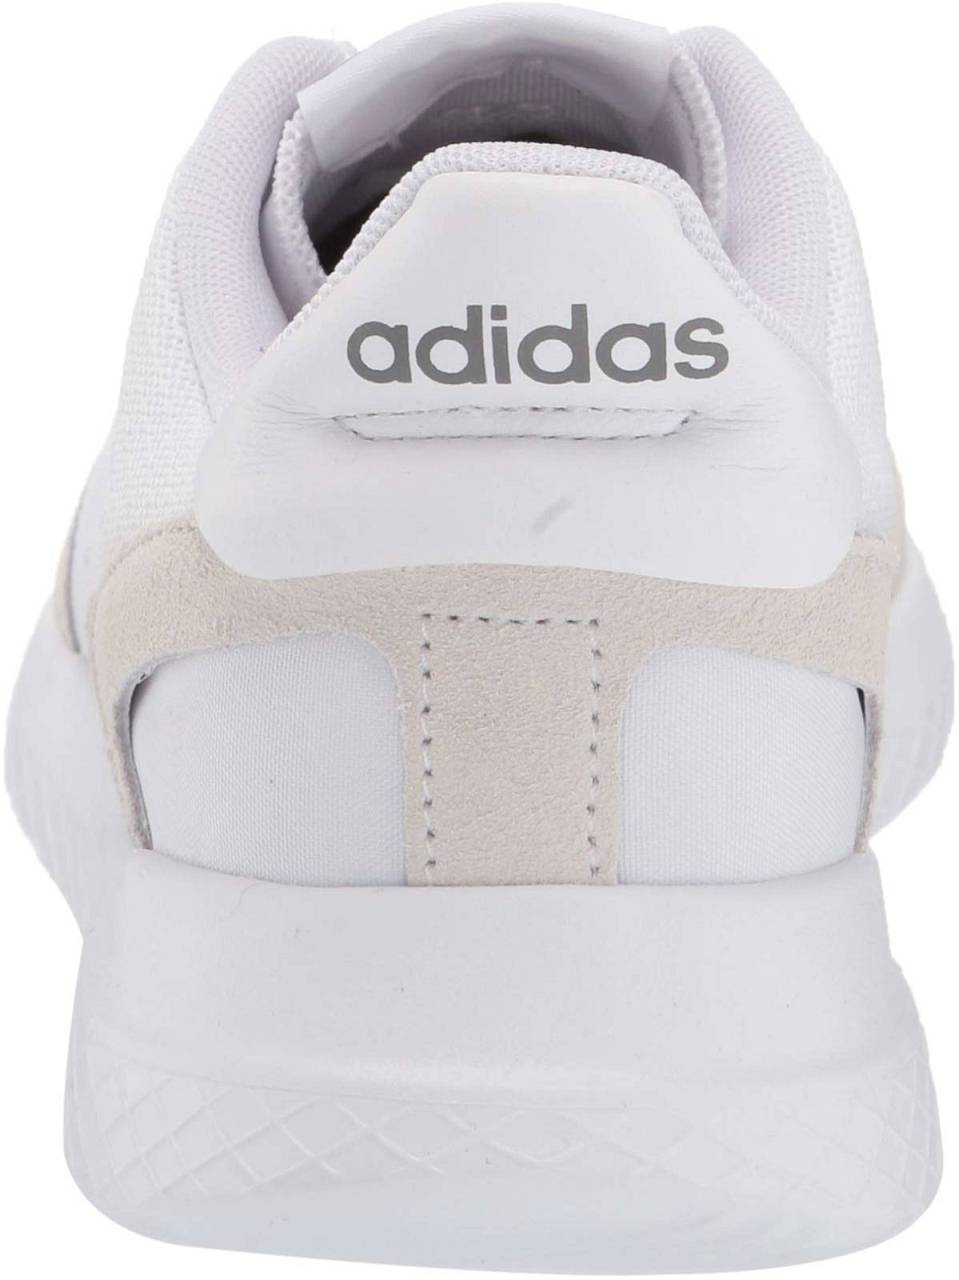 Adidas Archivo – Shoes Reviews & Reasons To Buy